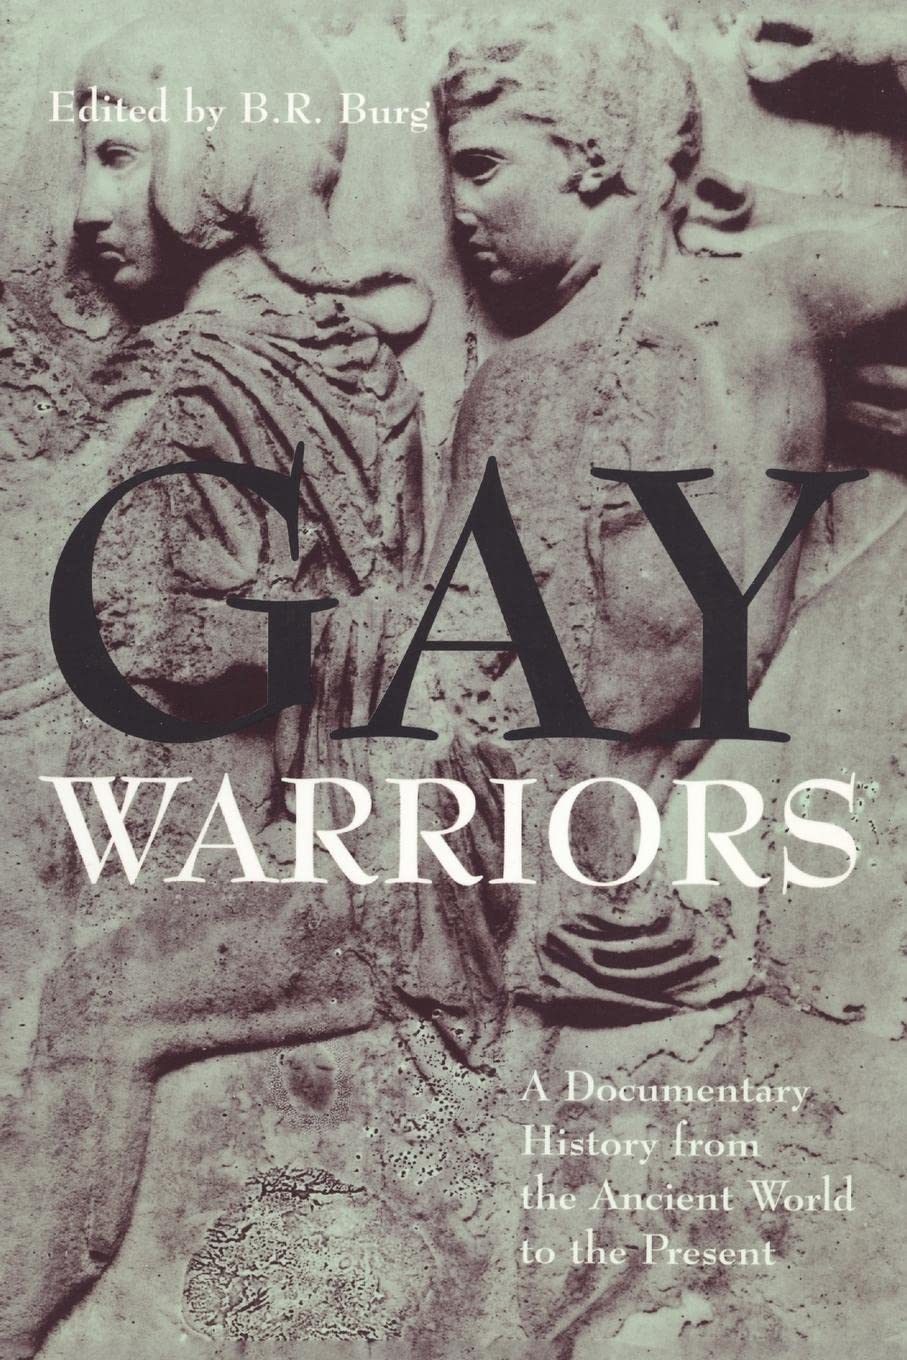 Gay Warriors - A Documentary History from the Ancient World to the Present